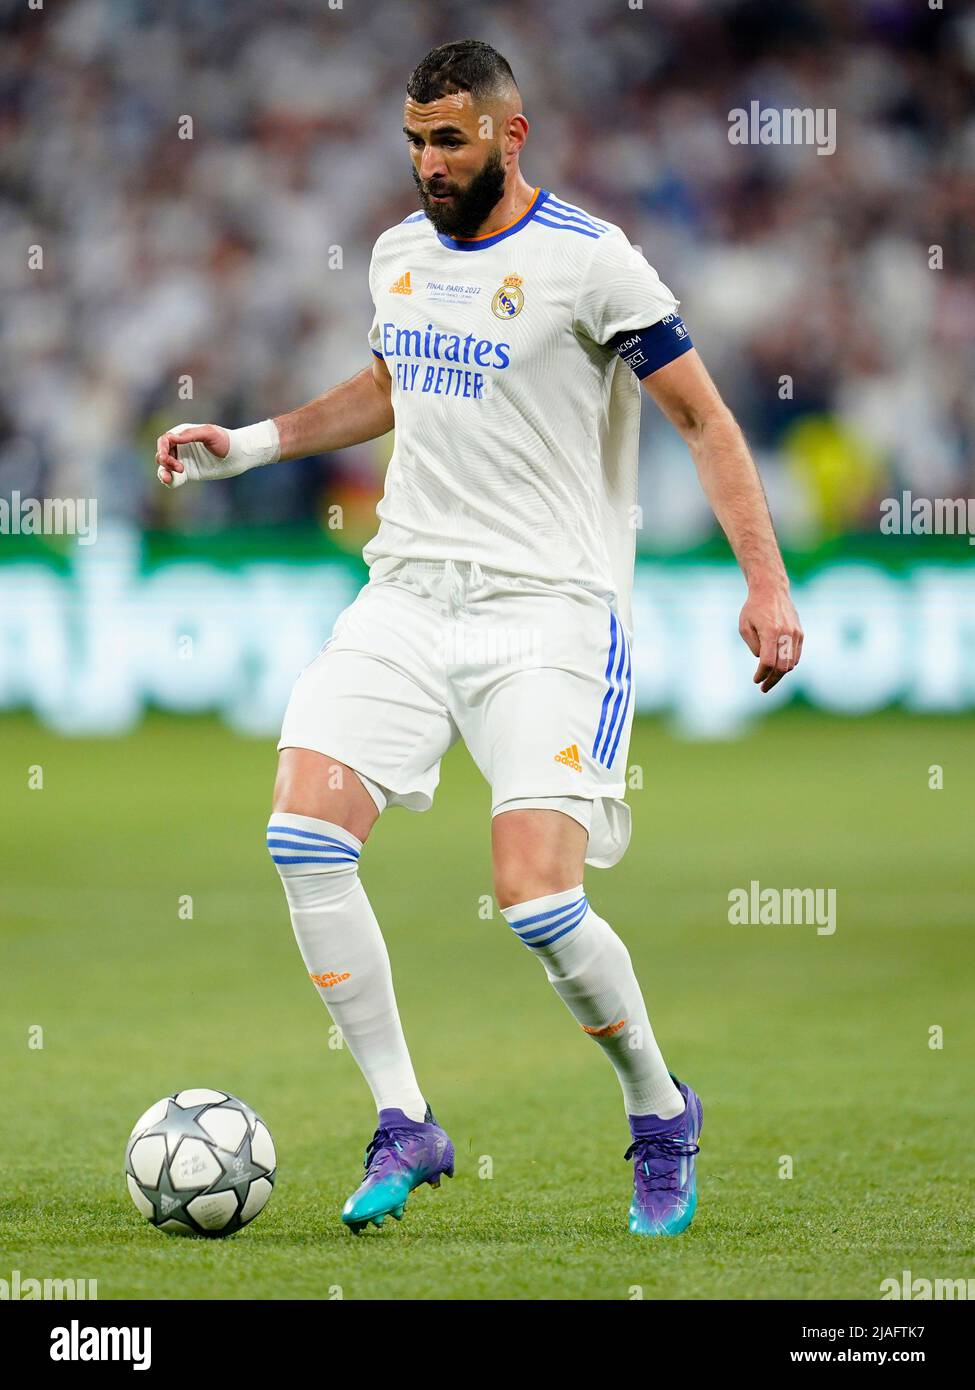 Karim Benzema of Real Madrid during the UEFA Champions League Final match between Liverpool FC and Real Madrid played at Stade de France on May 28, 2022 in Paris, France. (Photo / Magma) Stock Photo